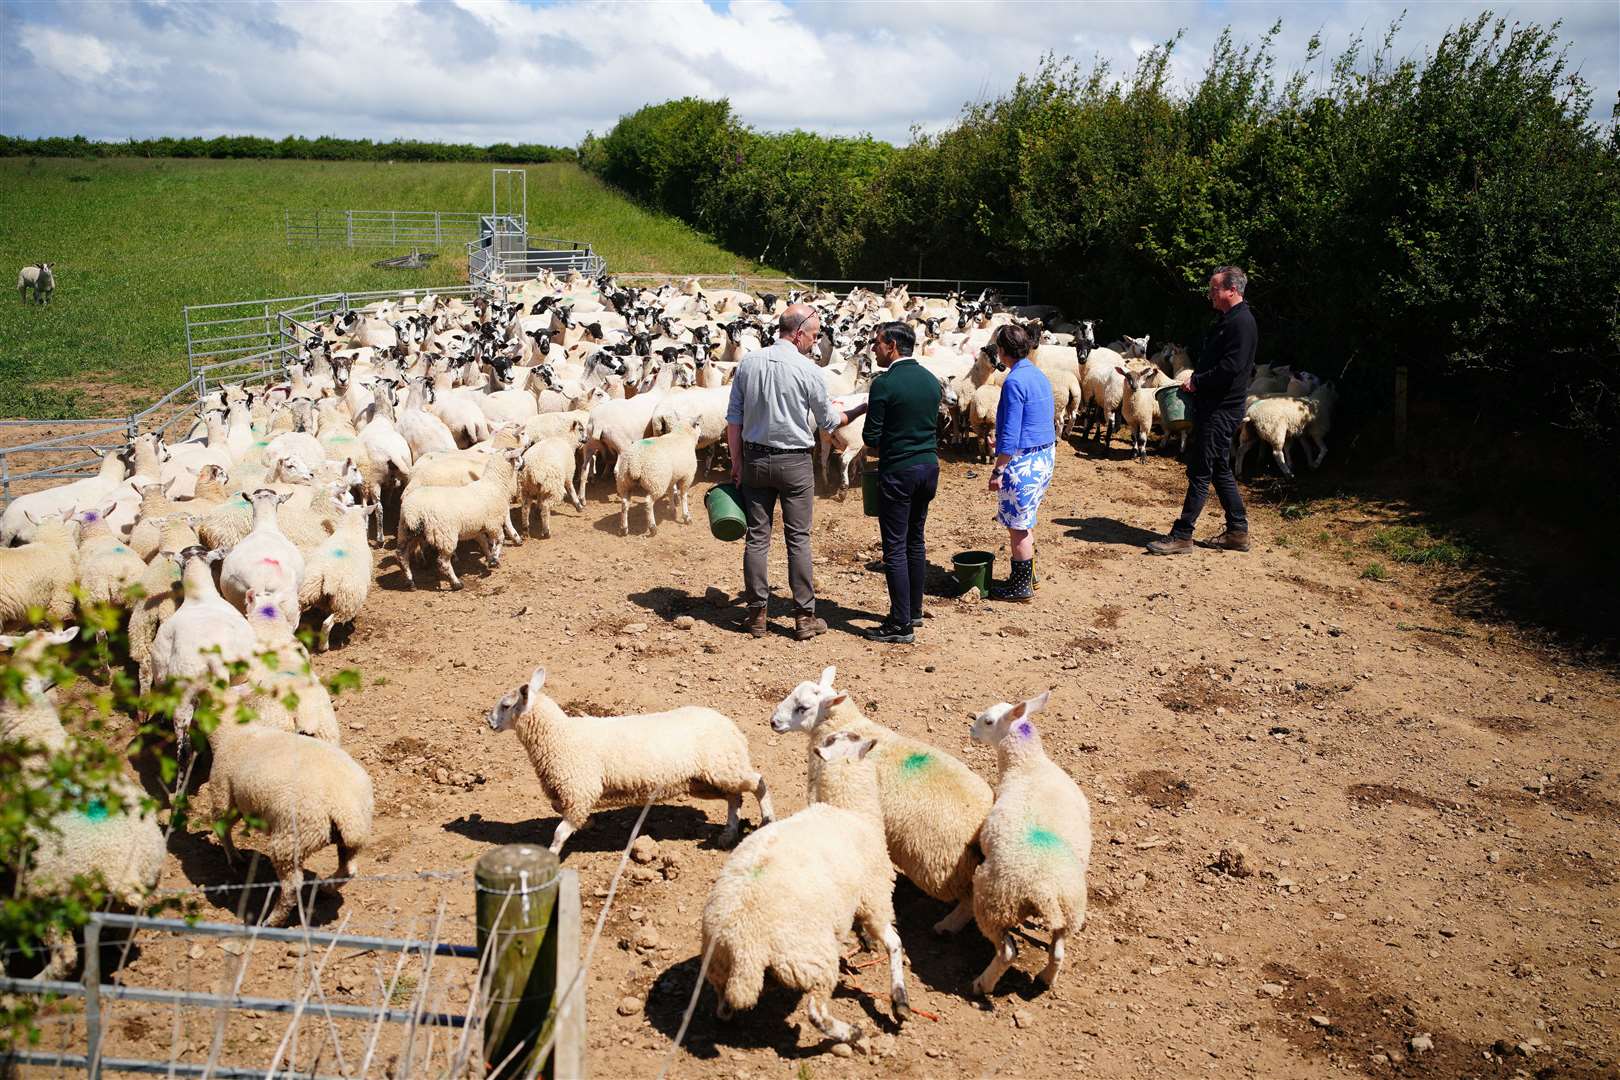 (left to right) Farmer David Chugg, Prime Minister Rishi Sunak, parliamentary candidate for North Devon Selaine Saxby and Foreign Secretary Lord David Cameron feed sheep during a visit to a farm in Devon (Ben Birchall/PA)